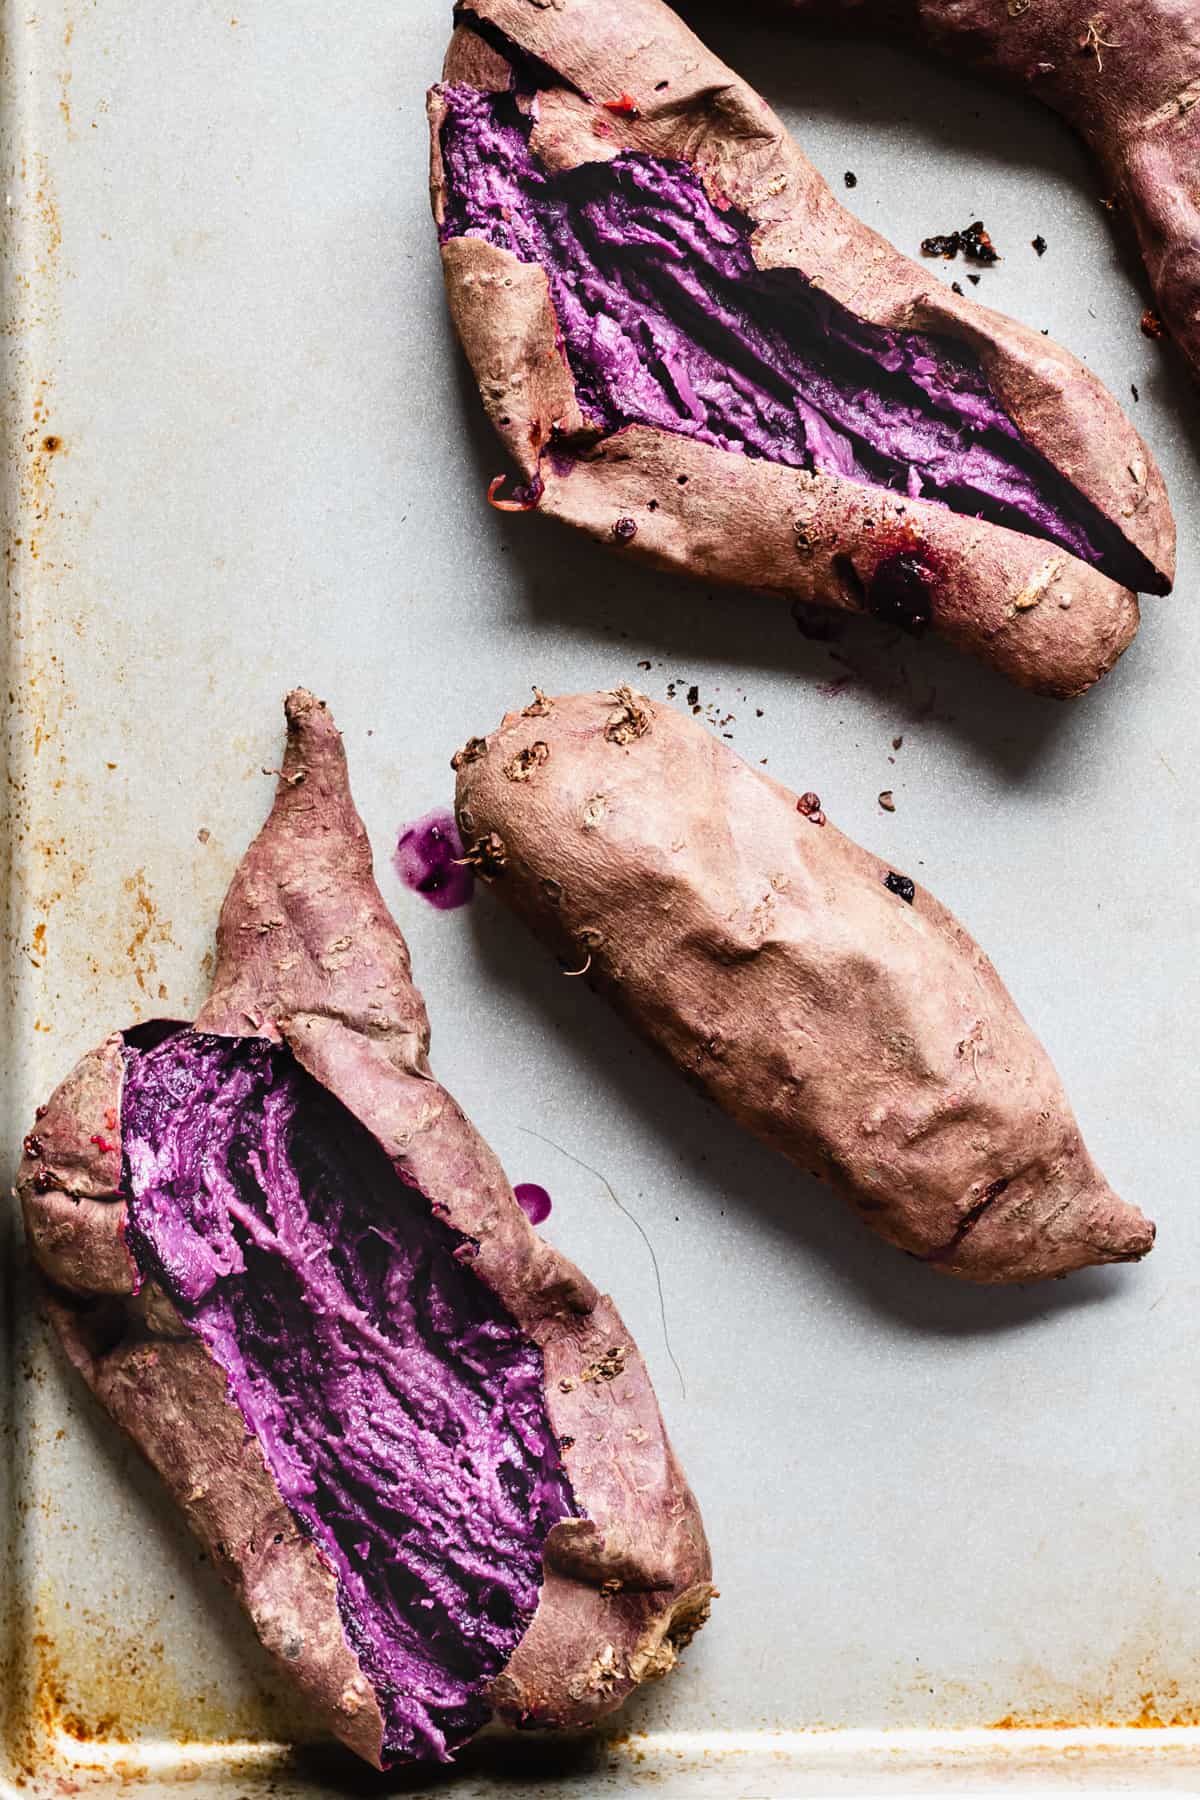 Baked purple sweet potatoes. Two are sliced open to expose the flesh.